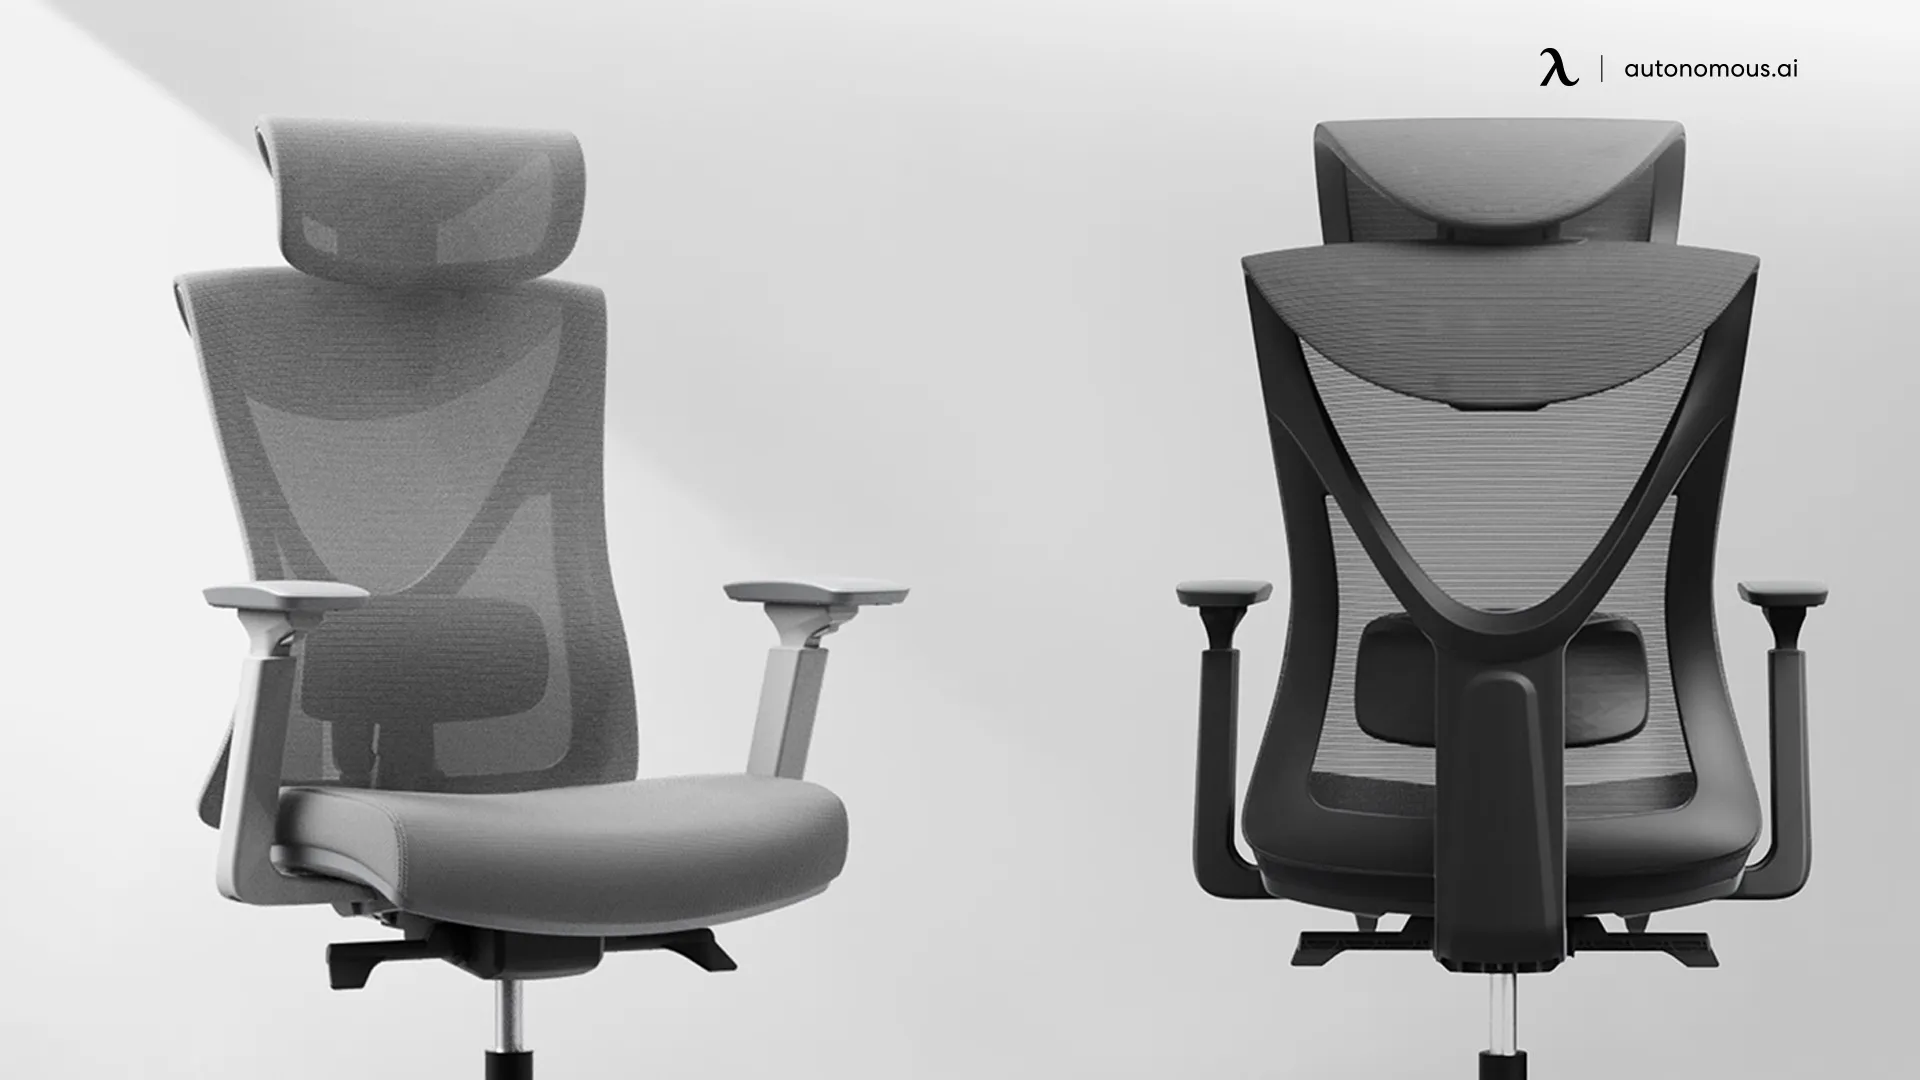 The Best Computer Chairs for Lower Back Pain